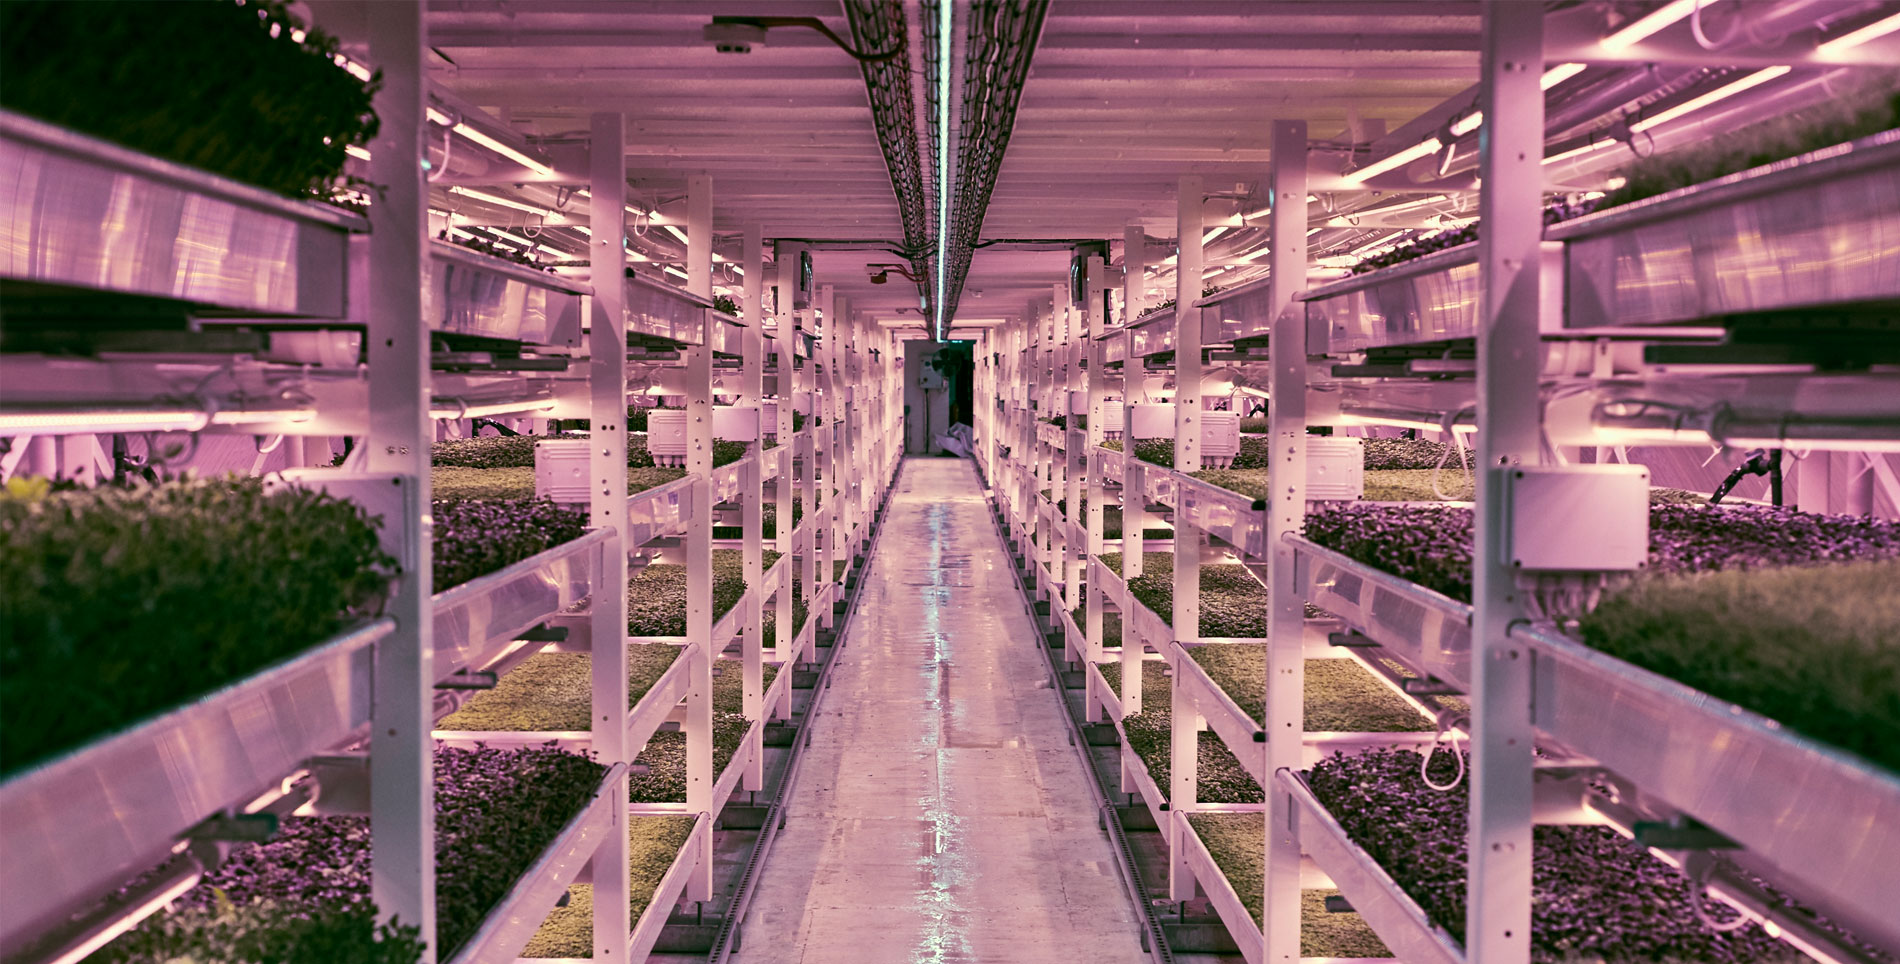 In London, Growing Underground Looks for Long-term Farming Solutions